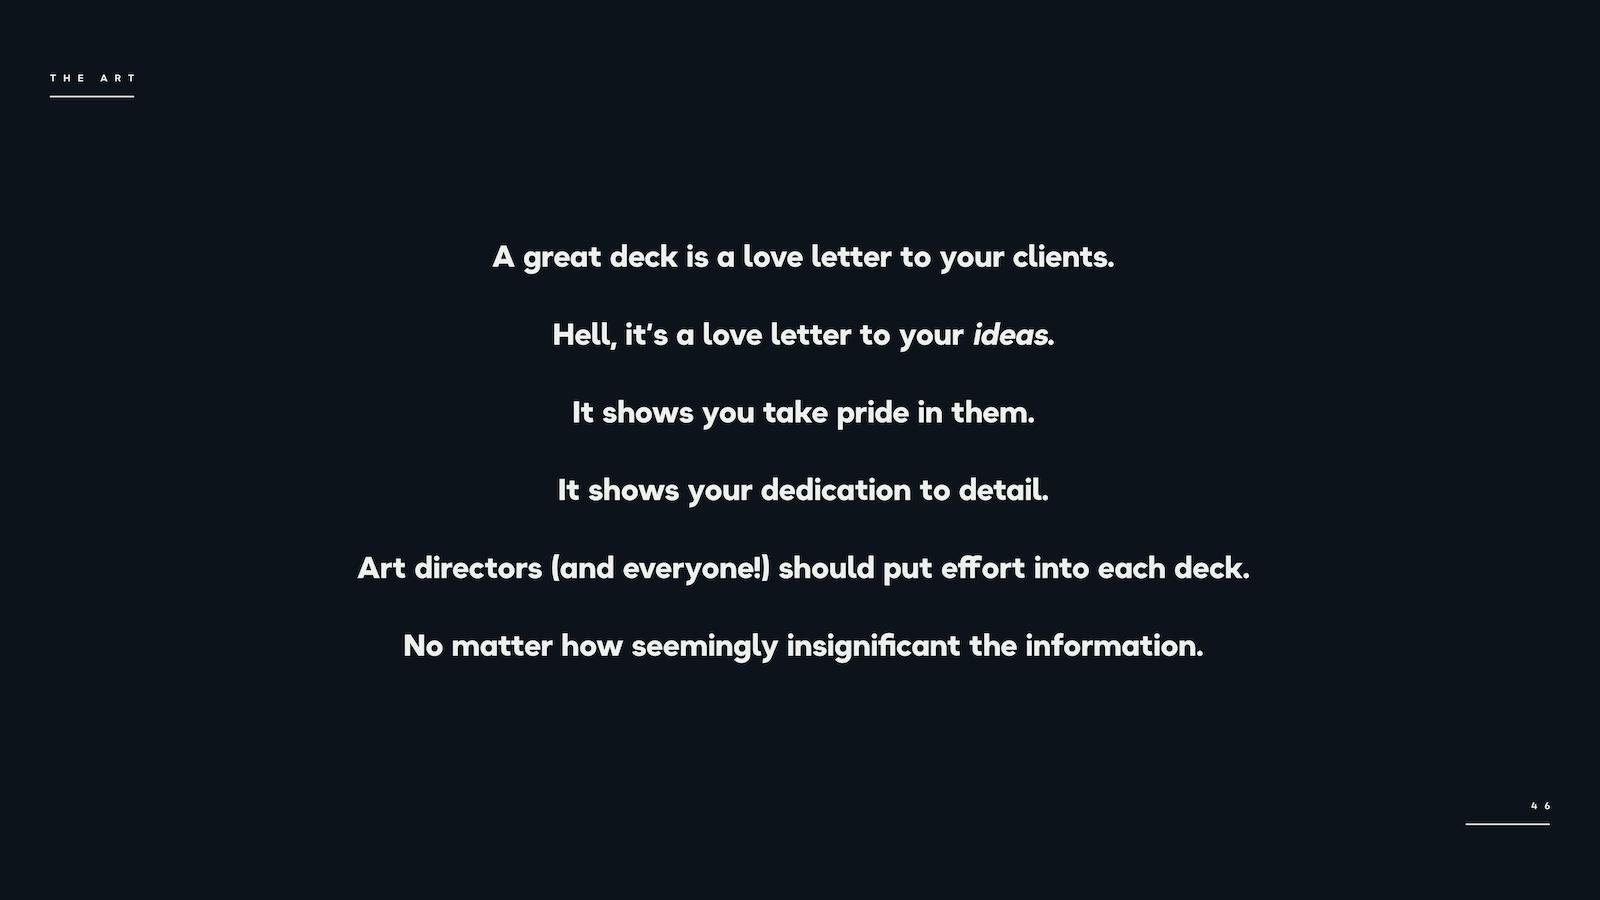 A great deck is a love letter to your clients. Hell, it's a love letter to your ideas. It shows you take pride in them. It shows your dedication to detail. Art directors (and everyone!) should put effort into each deck. No matter how seemingly insignificant the information.